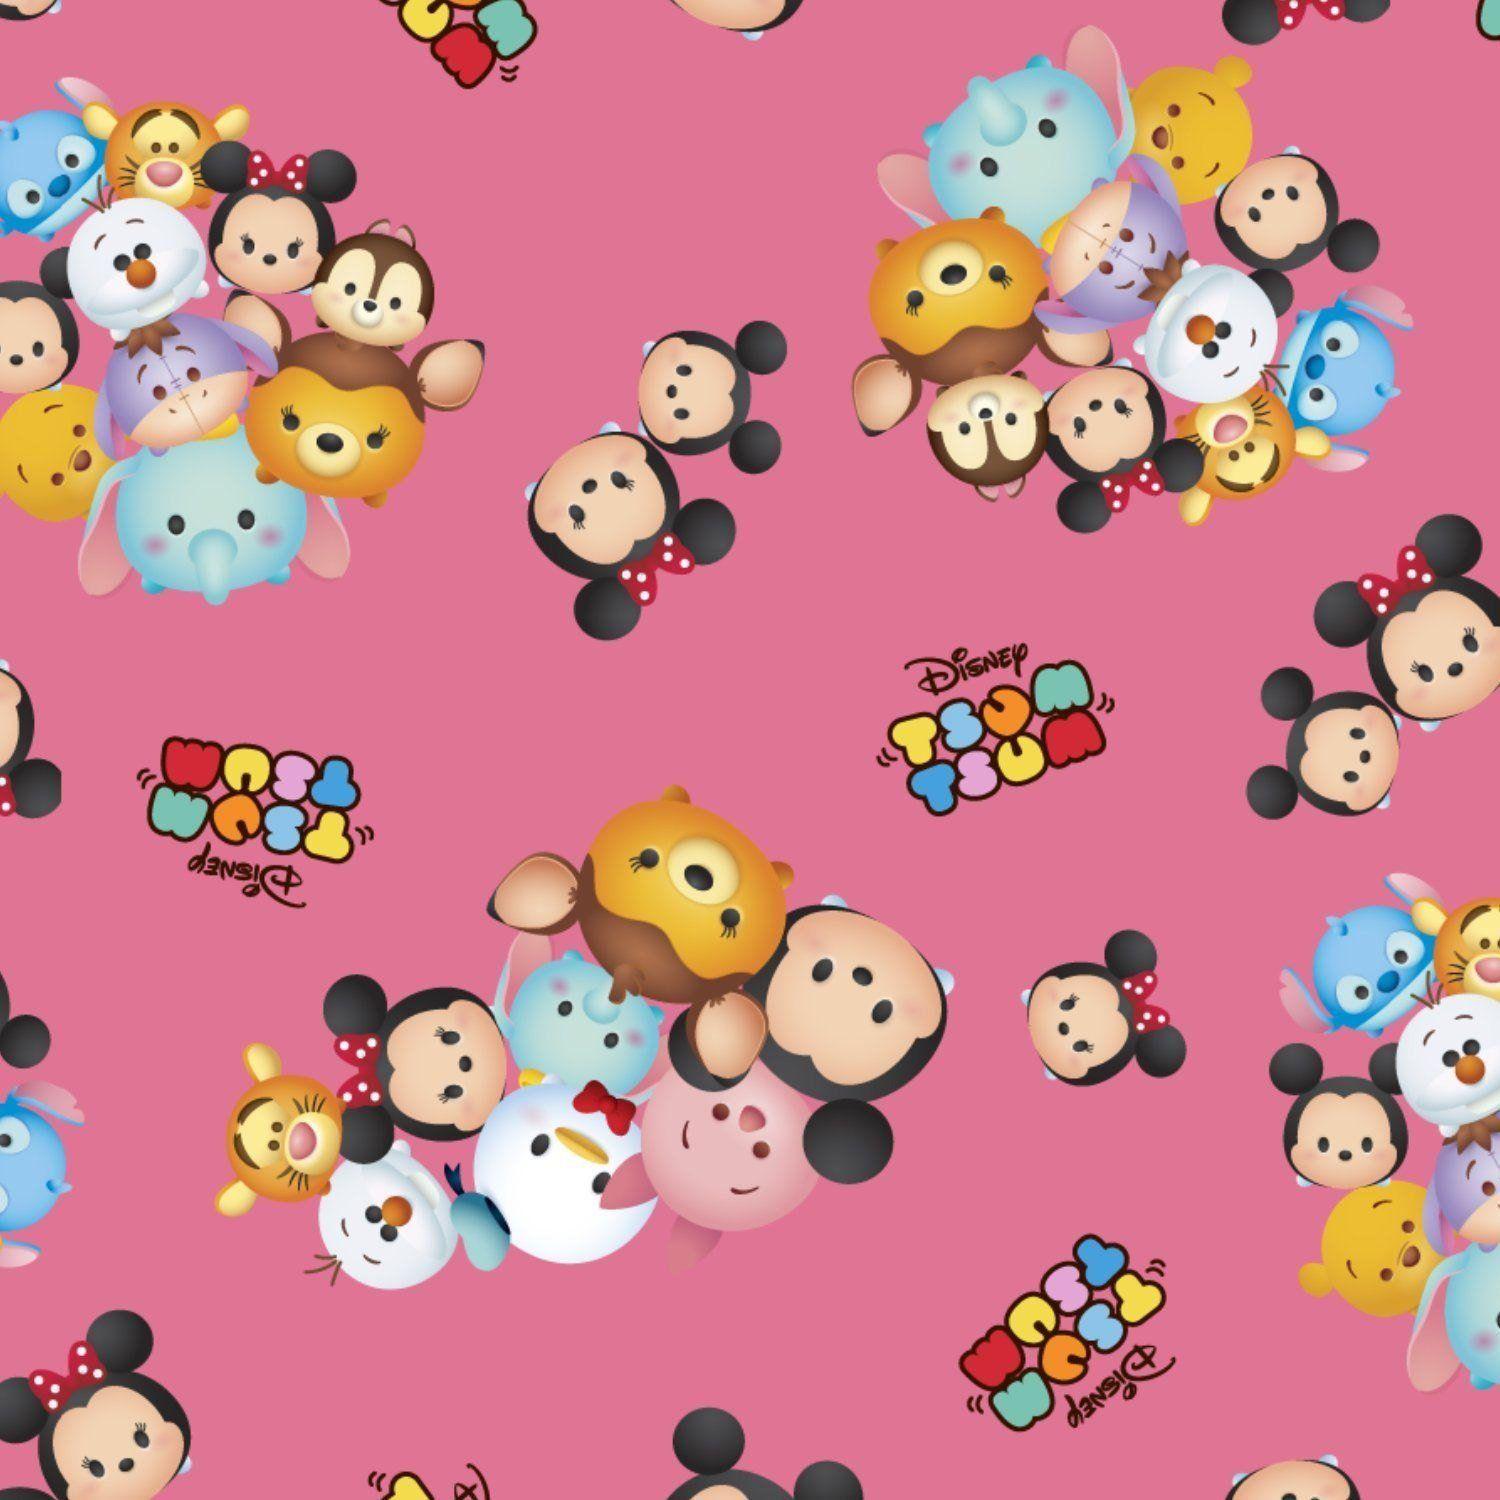 Pink Mickey Mouse Logo - Disney Fabric: Disney Tsum Tsum Mouse fabric and friends